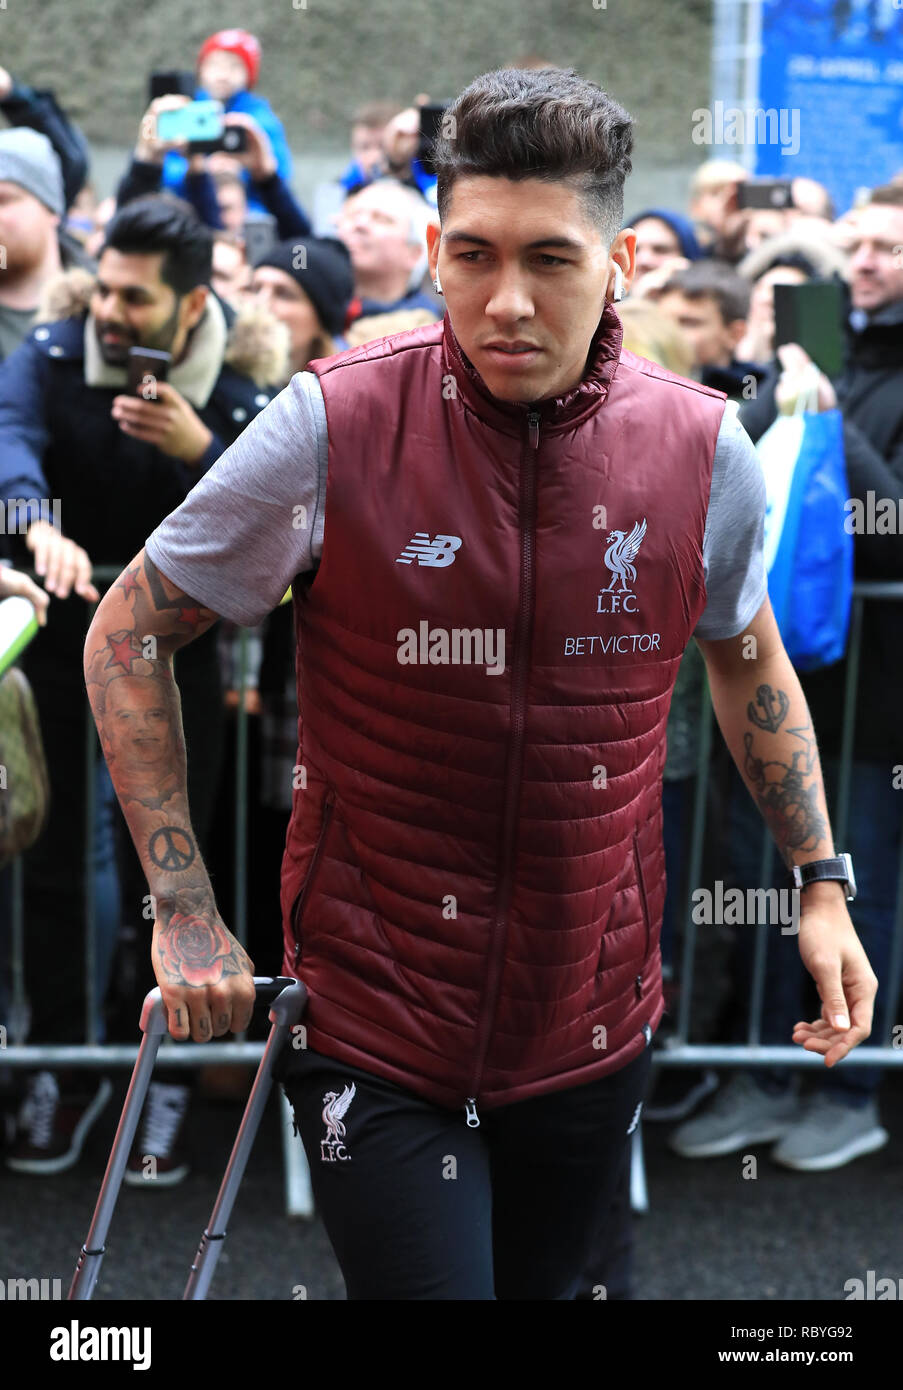 Liverpool's Roberto Firmino arrives at the stadium prior to the Premier League match at the AMEX Stadium, Brighton. PRESS ASSOCIATION Photo. Picture date: Saturday January 12, 2019. See PA story SOCCER Brighton. Photo credit should read: Gareth Fuller/PA Wire. RESTRICTIONS: No use with unauthorised audio, video, data, fixture lists, club/league logos or 'live' services. Online in-match use limited to 120 images, no video emulation. No use in betting, games or single club/league/player publications. Stock Photo